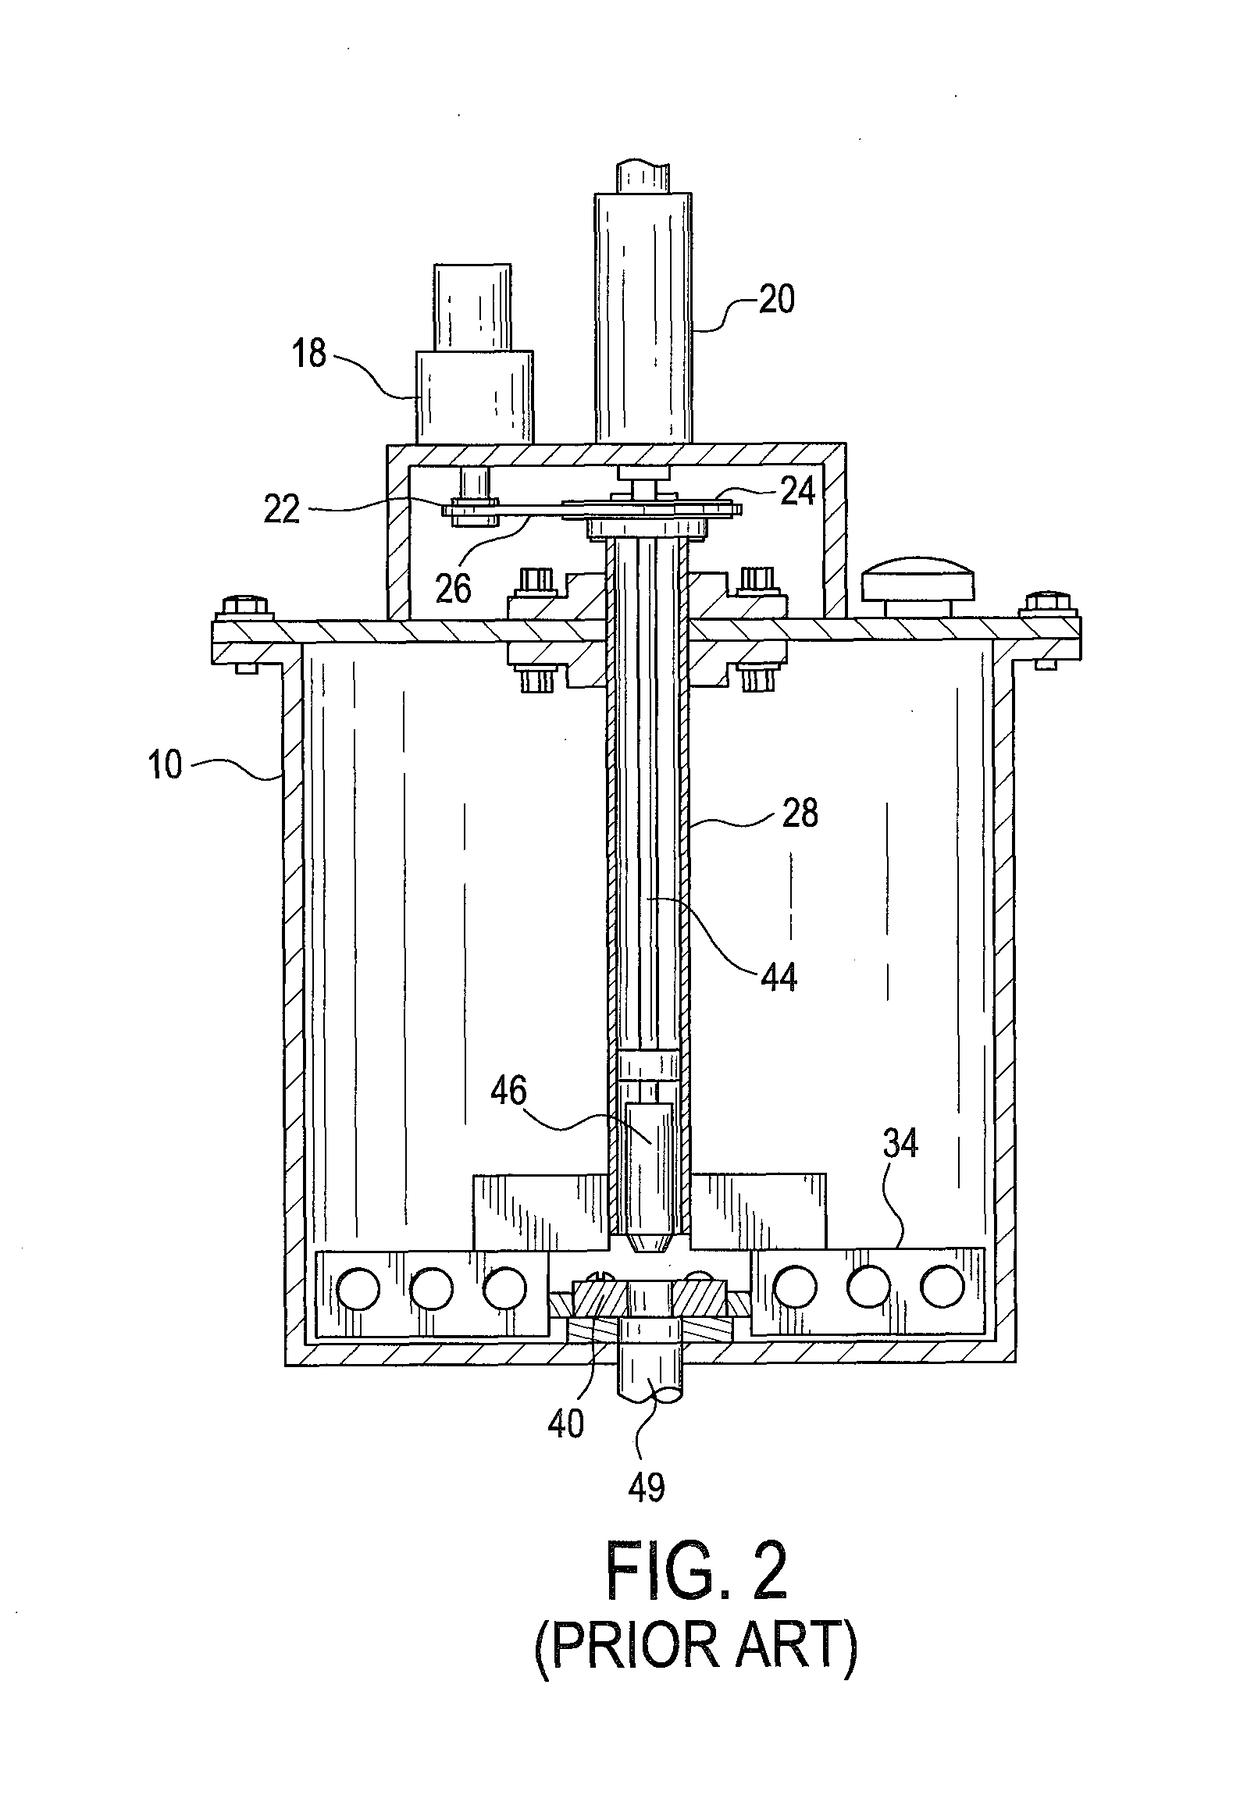 Integral melter and pump system for the application of bituminous adhesives and highway crack-sealing materials, and a method of making the same